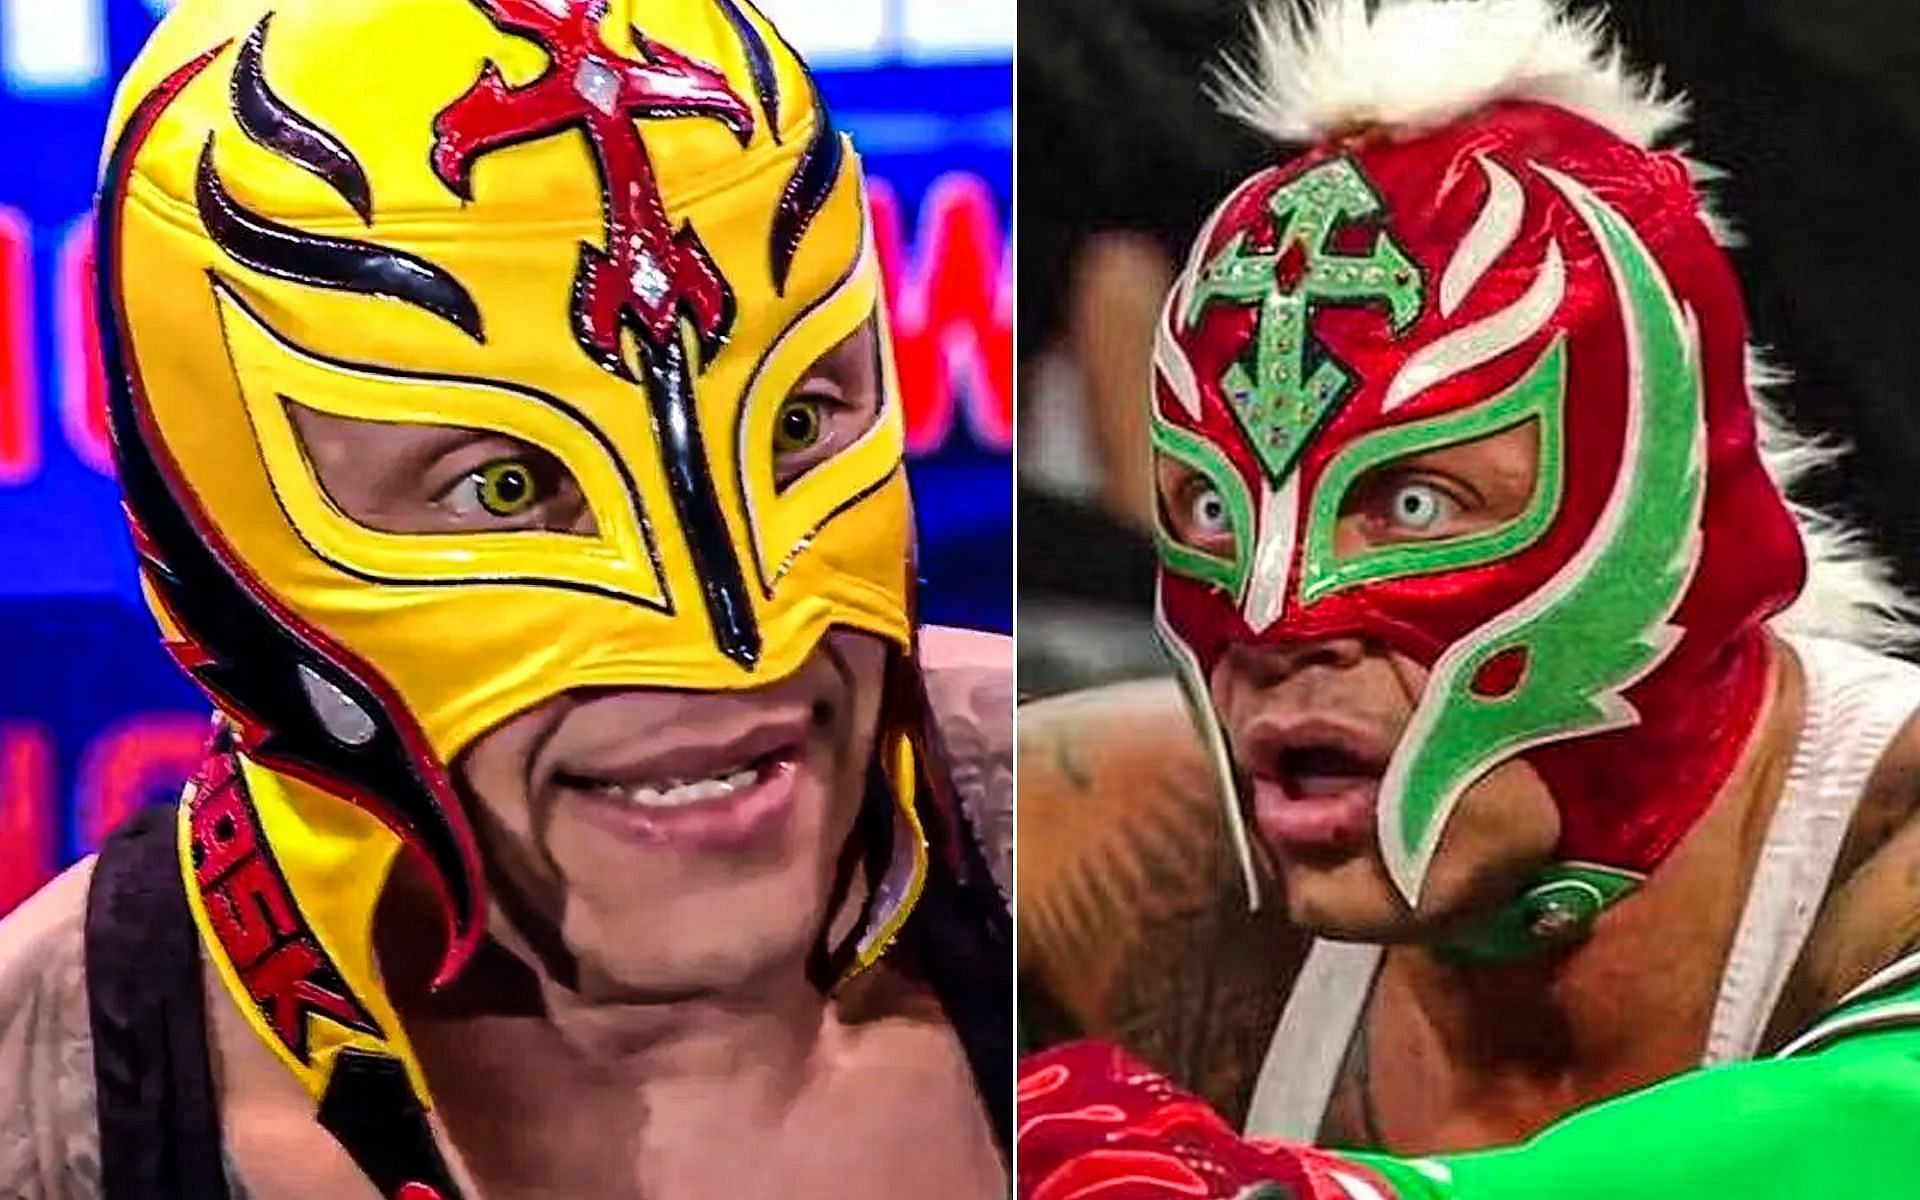 Rey Mysterio to confront Logan Paul on SmackDown